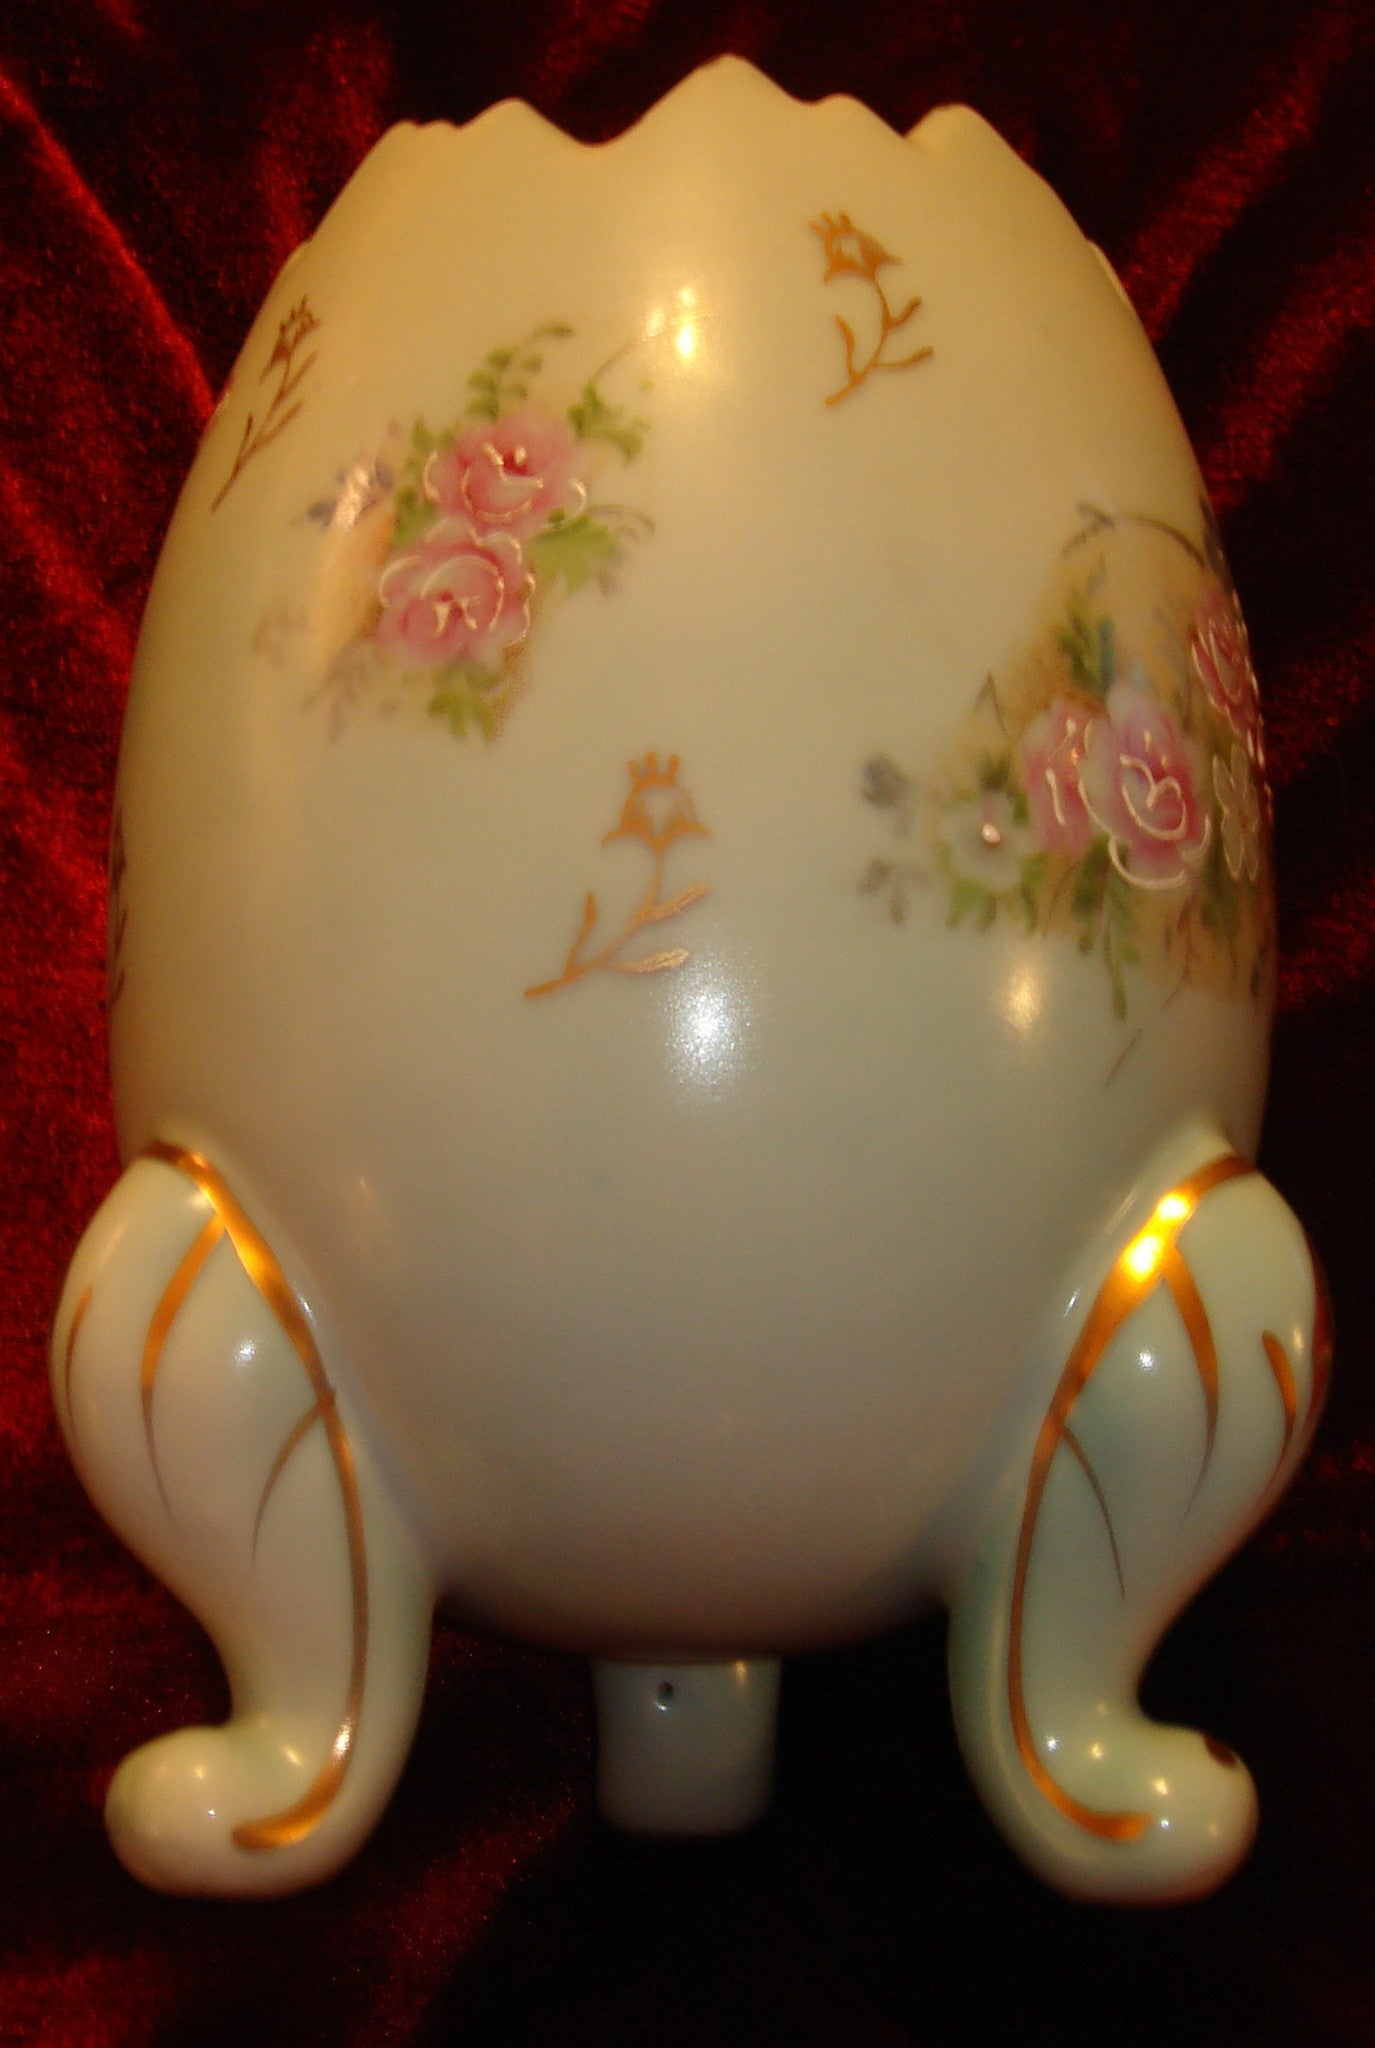 Inarco - Porcelain - Hand painted - Gilded - Beautiful - Vintage - Footed Egg Vase!